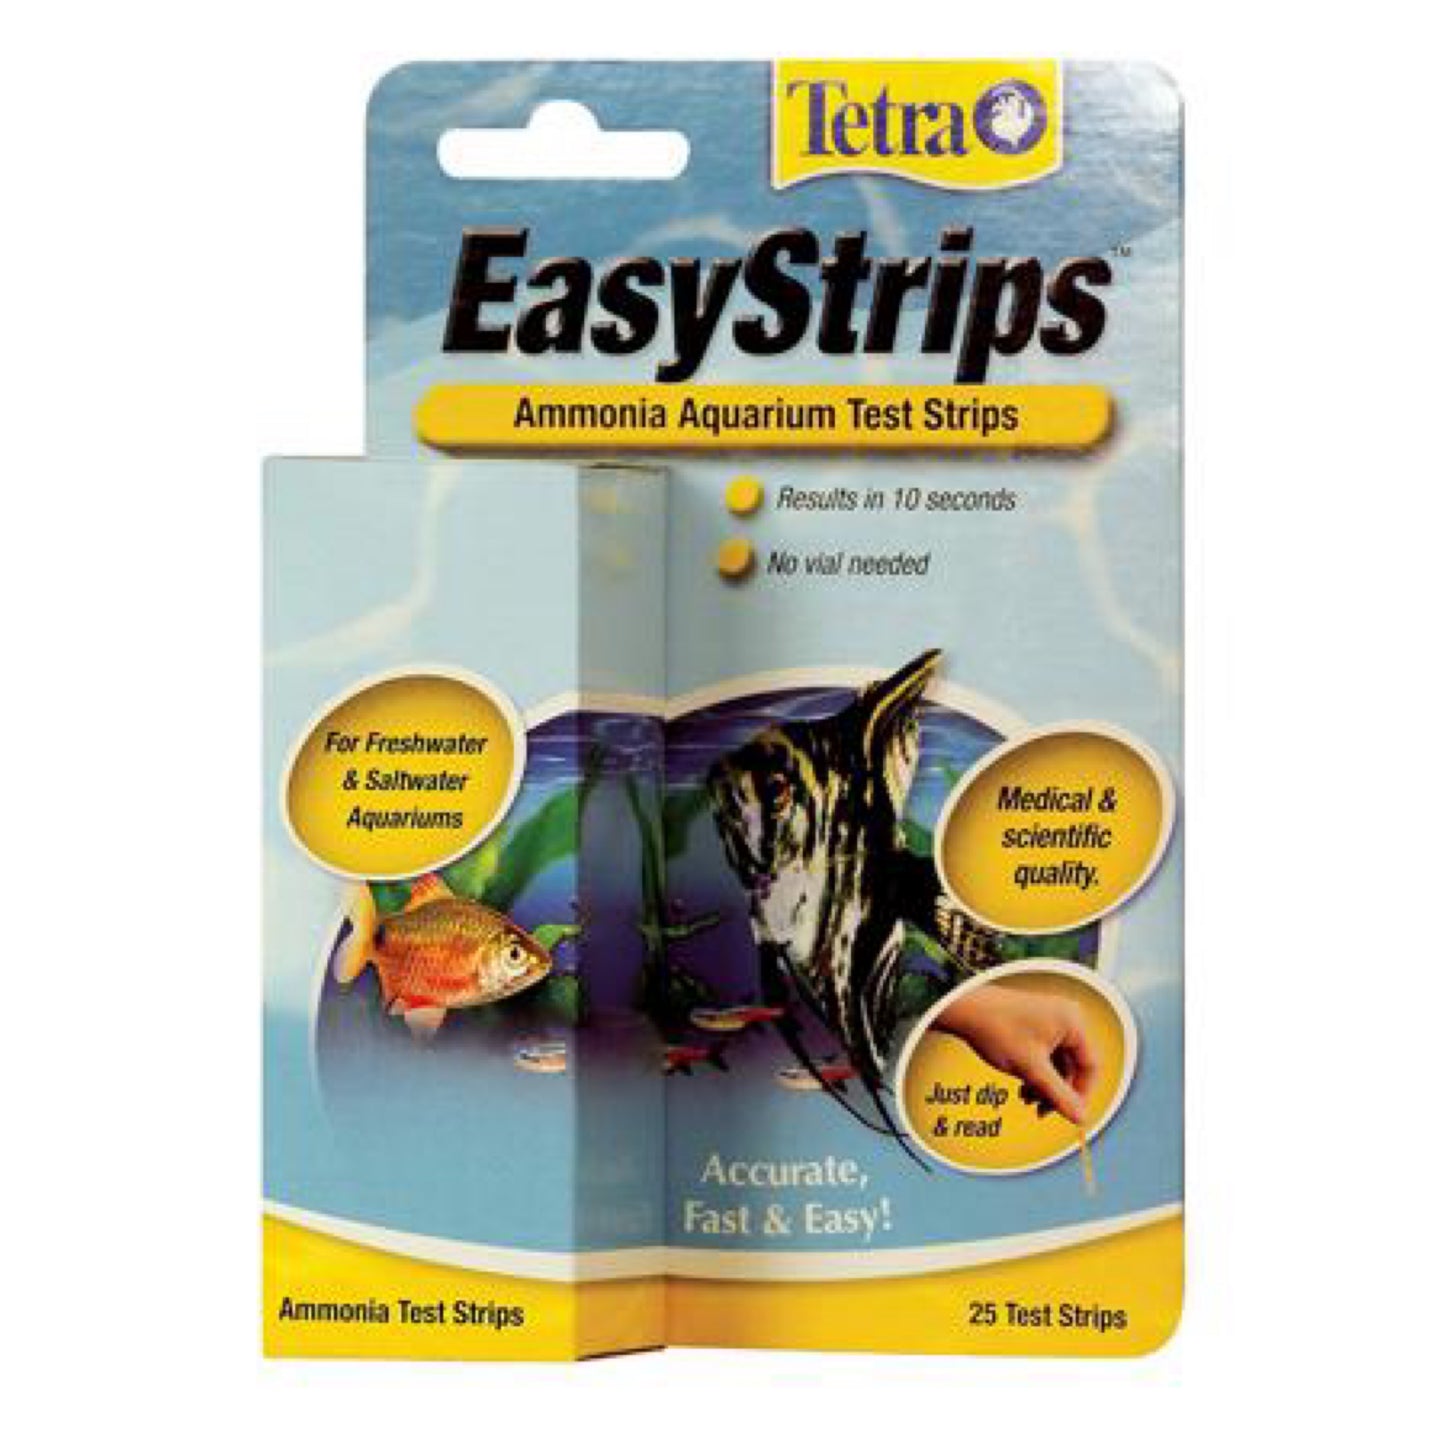 Tetra EasyStrips 25 Count, Ammonia Test Strips for Aquariums, Water Testing, 25-Strip